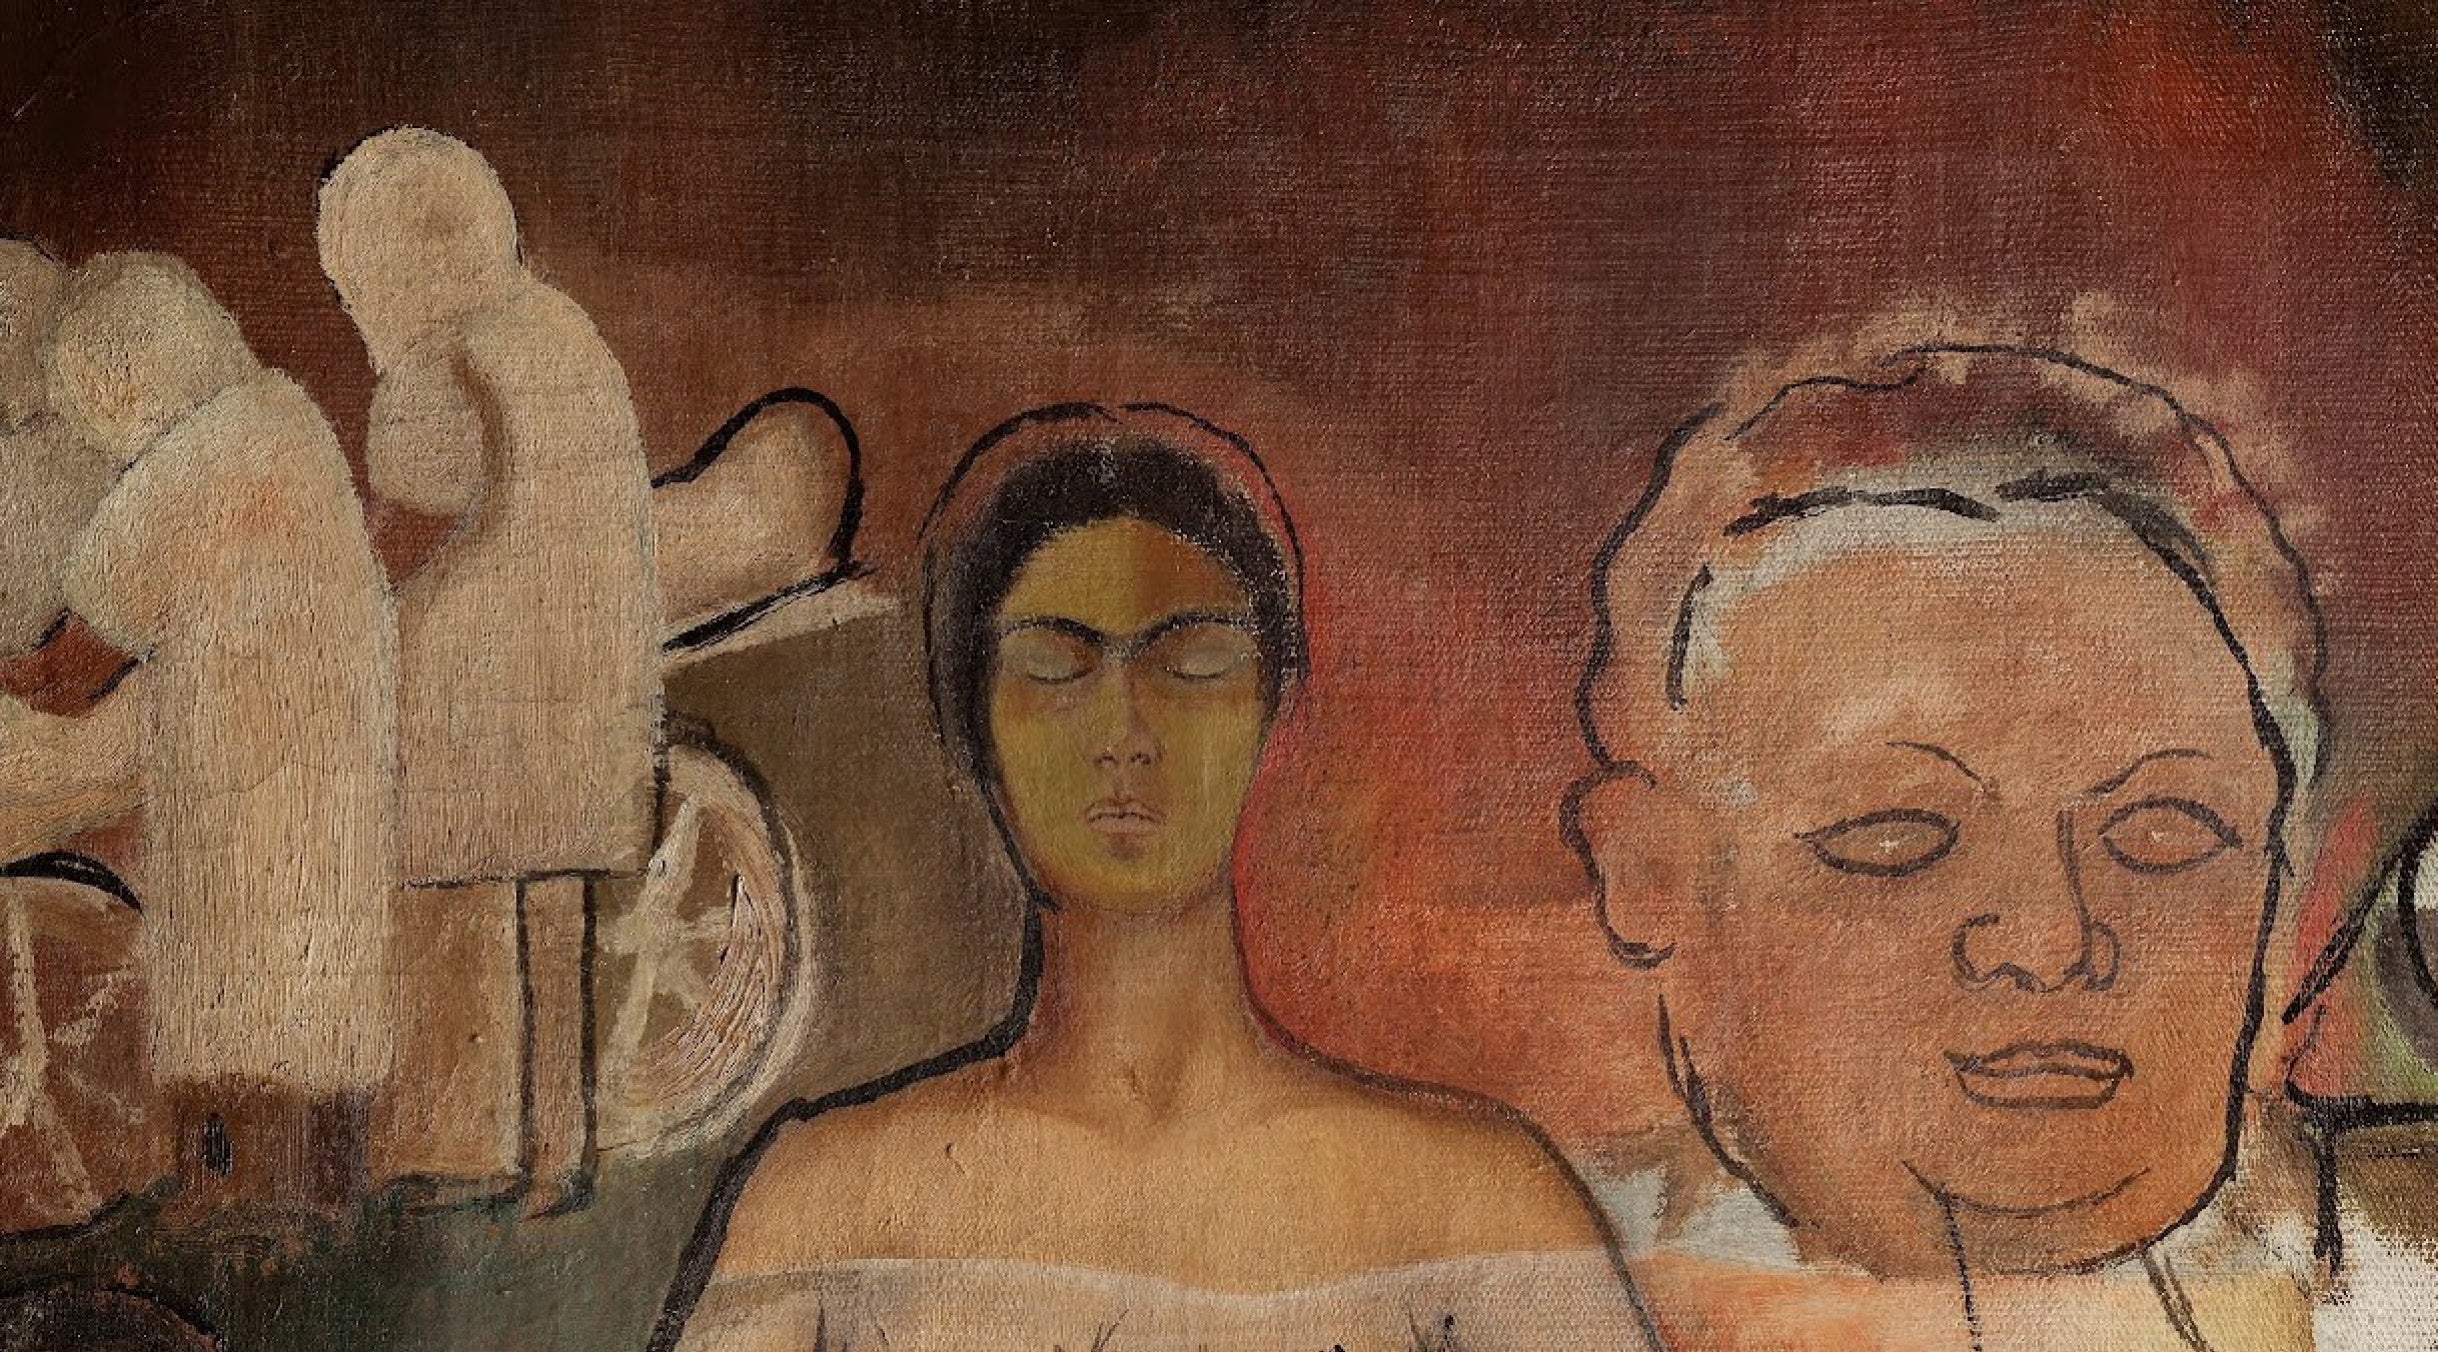 Frida and the cesarean section